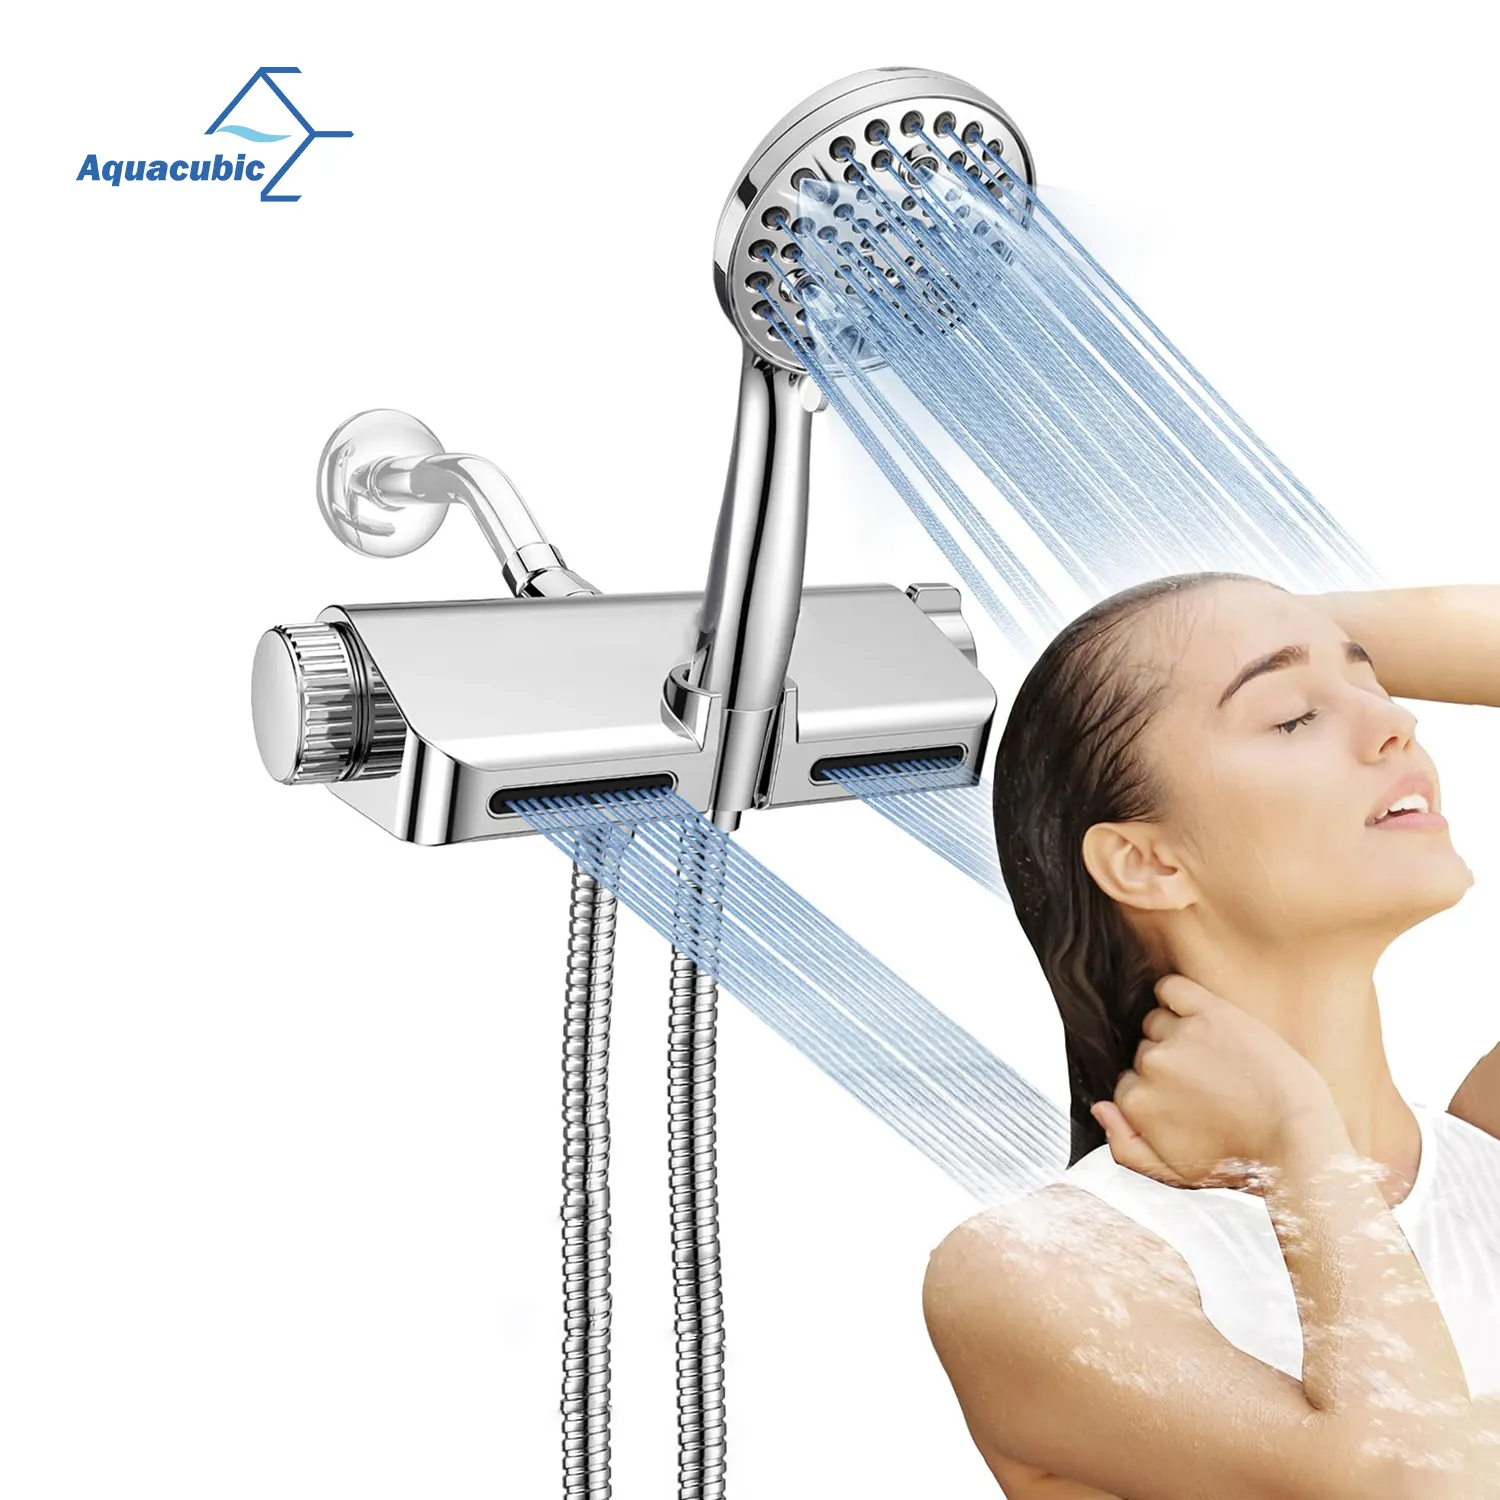 Aquacubic Modern 10 Functions Chrome Handheled Shower Spraying Set with Filter and Diverter